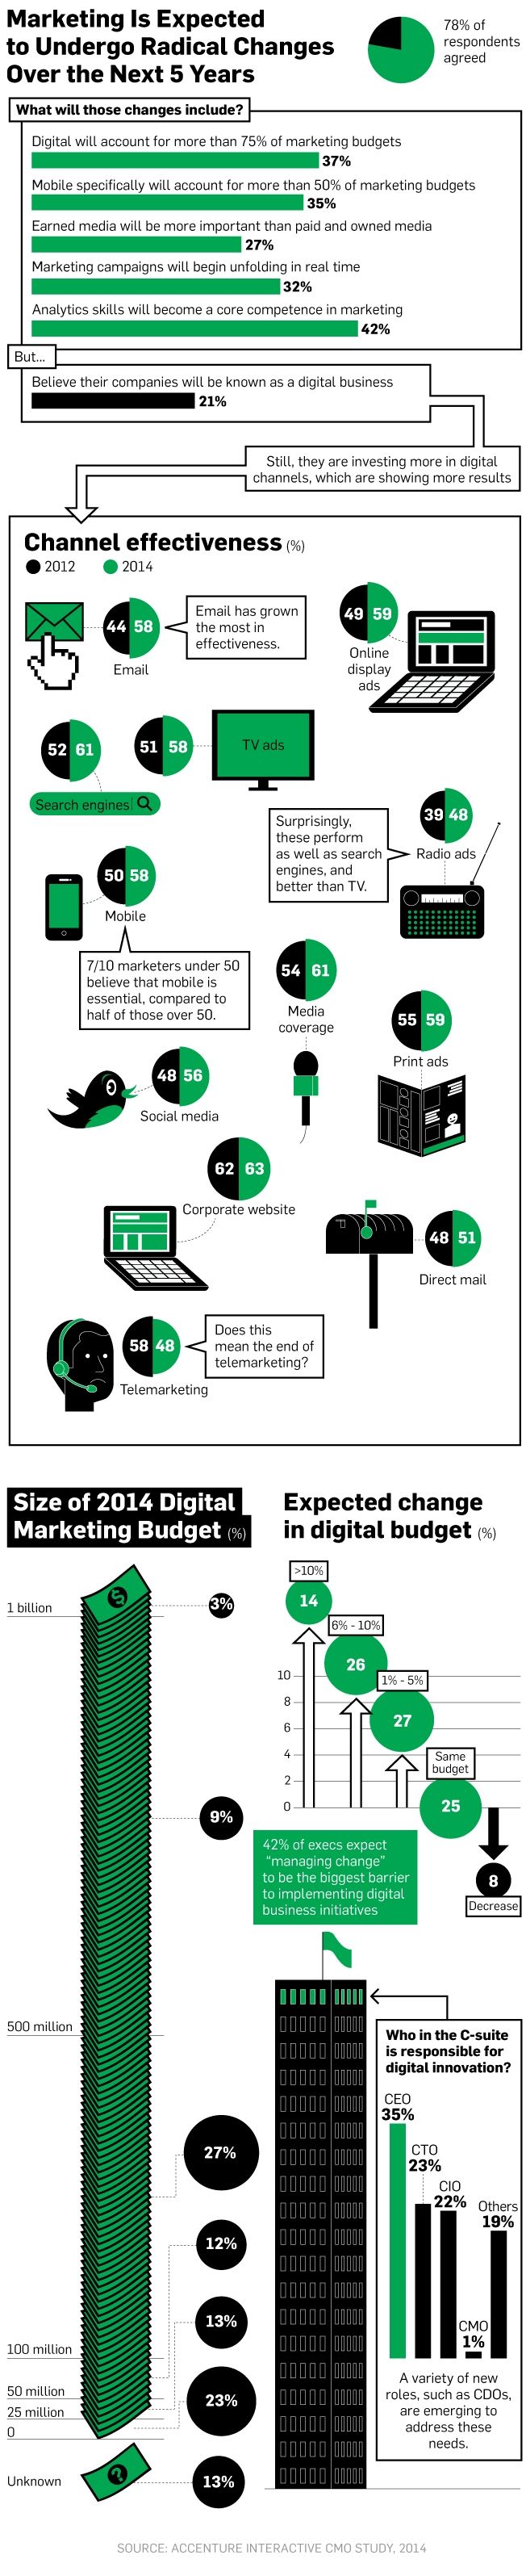 Advertising-Infographics-Infographic-CMOs-Are-Preparing-for-Digital-to-Grow-to-75-of-Marketing-Budgets Advertising Infographics : Infographic: CMOs Are Preparing for Digital to Grow to 75% of Marketing Budgets ...